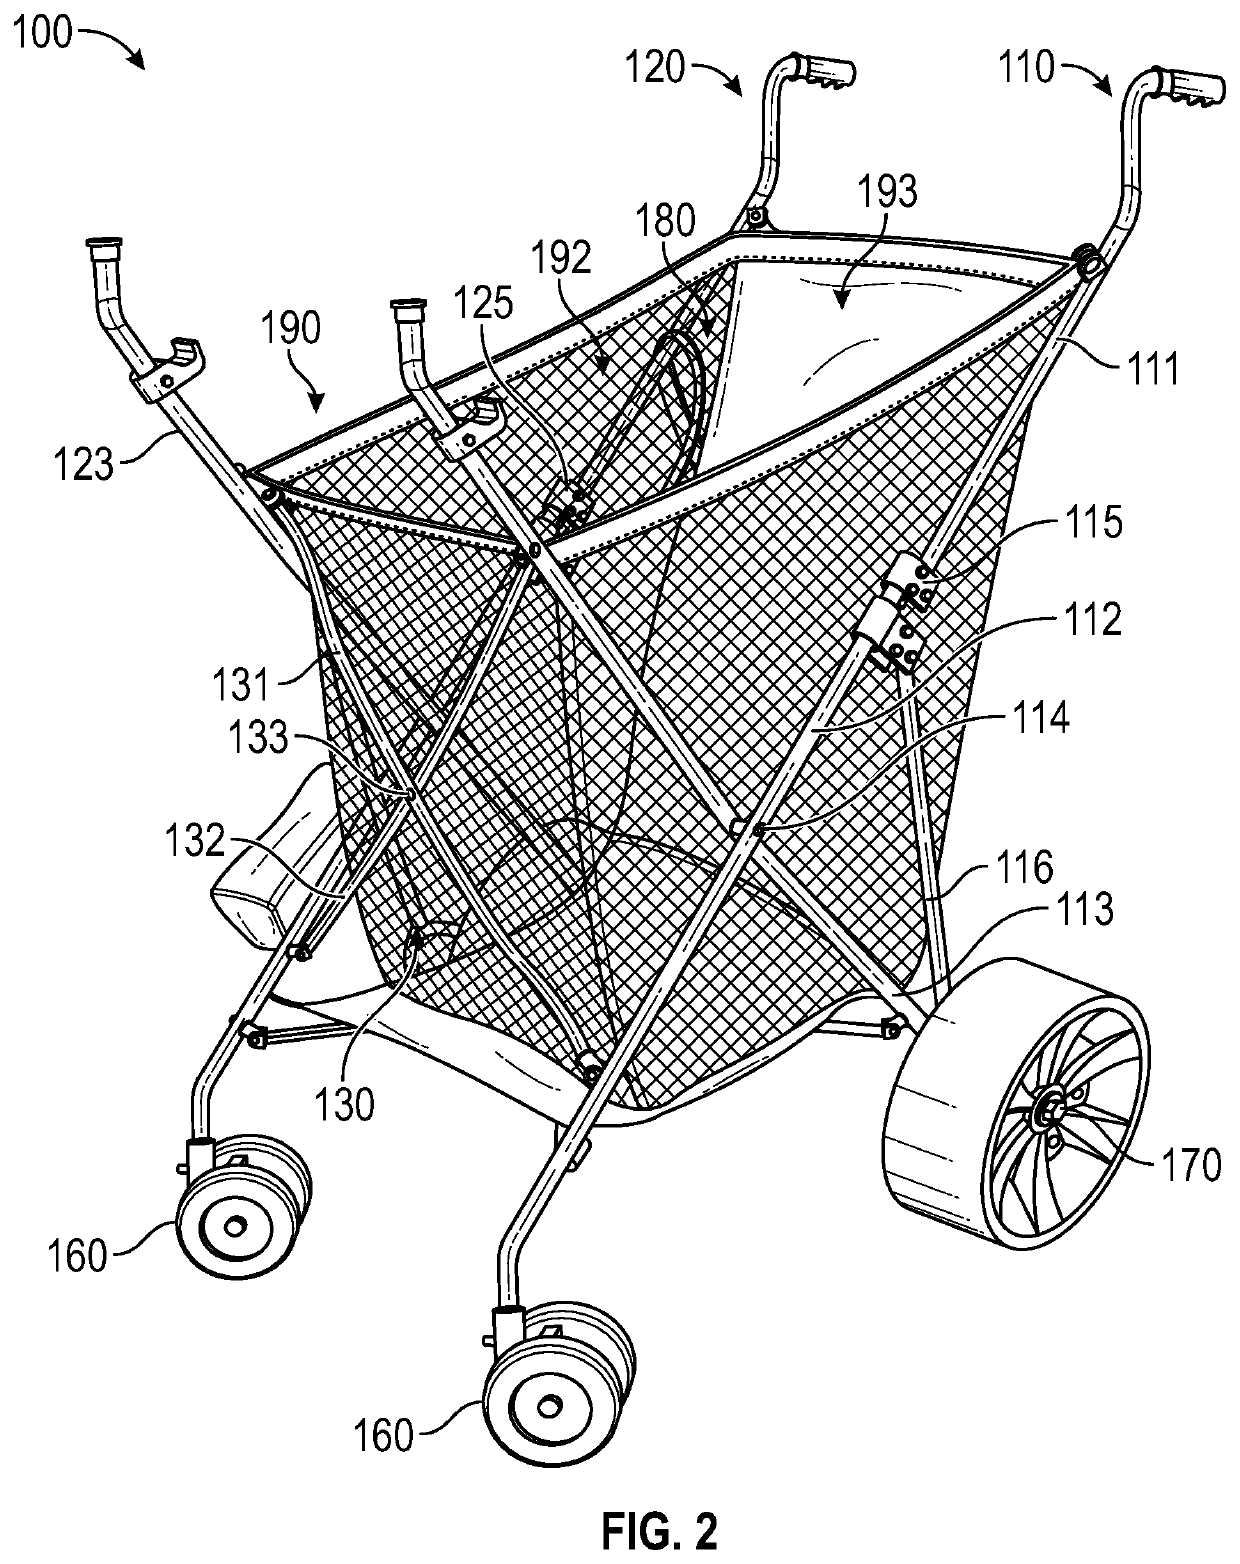 Collapsible cart with fabric in receiving space